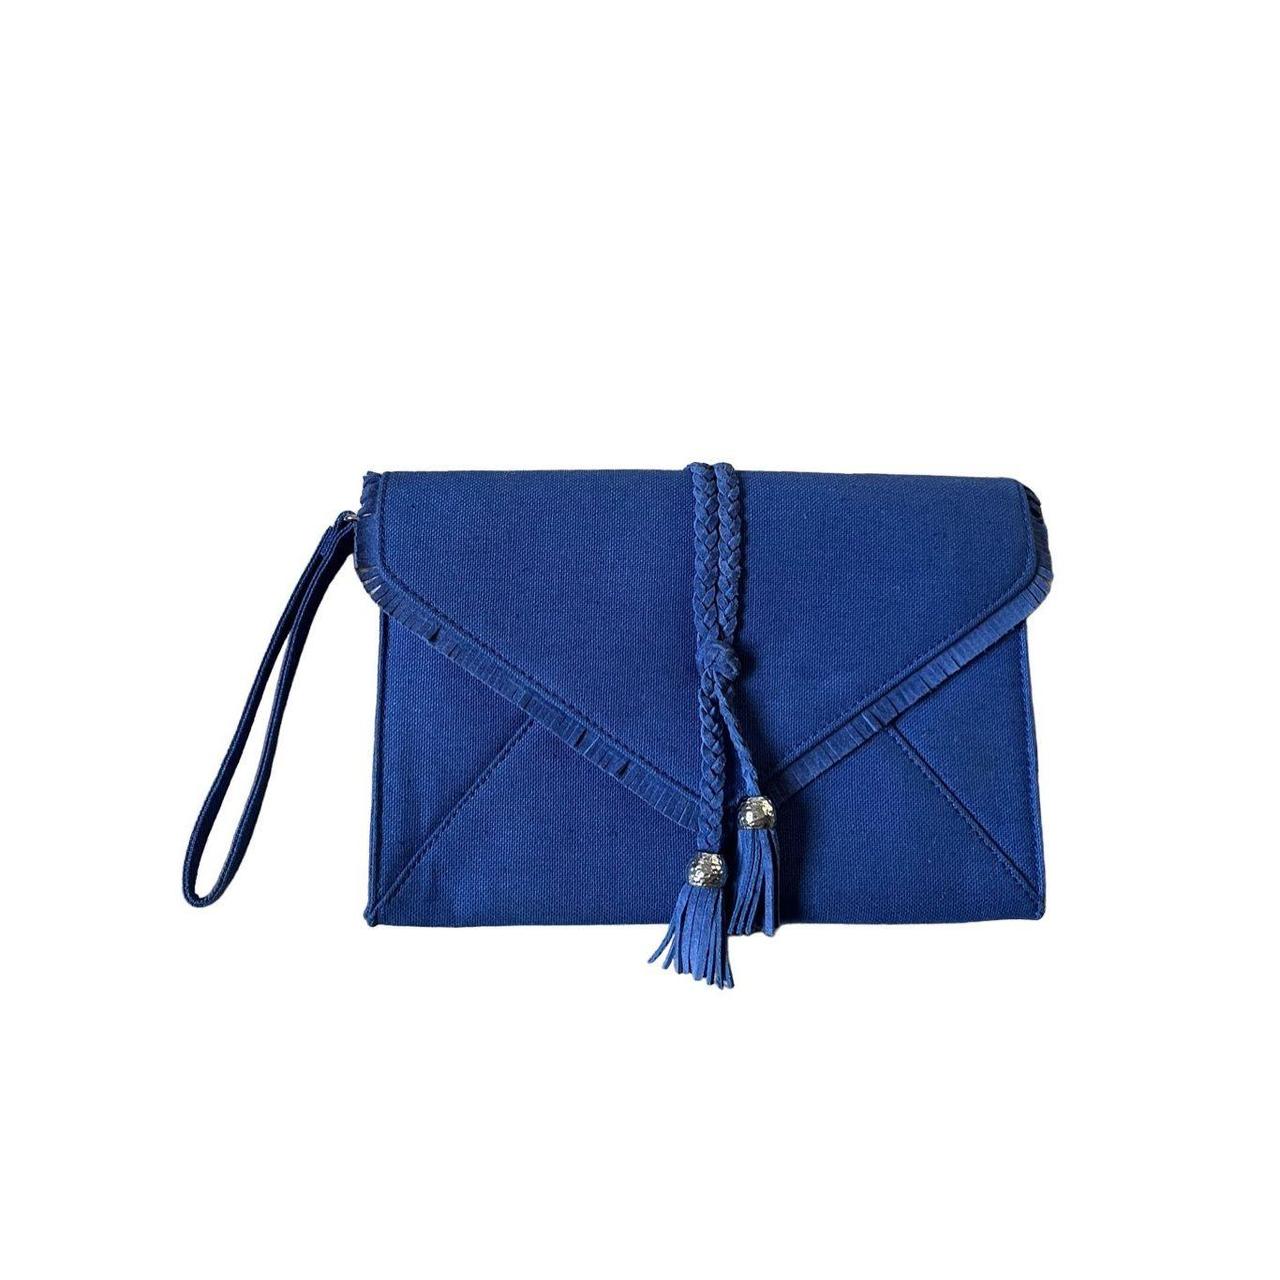 Navy Blue Leather Cross-body Bag, Small Women Purse, Sury - Fgalaze Genuine Leather  Bags & Accessories